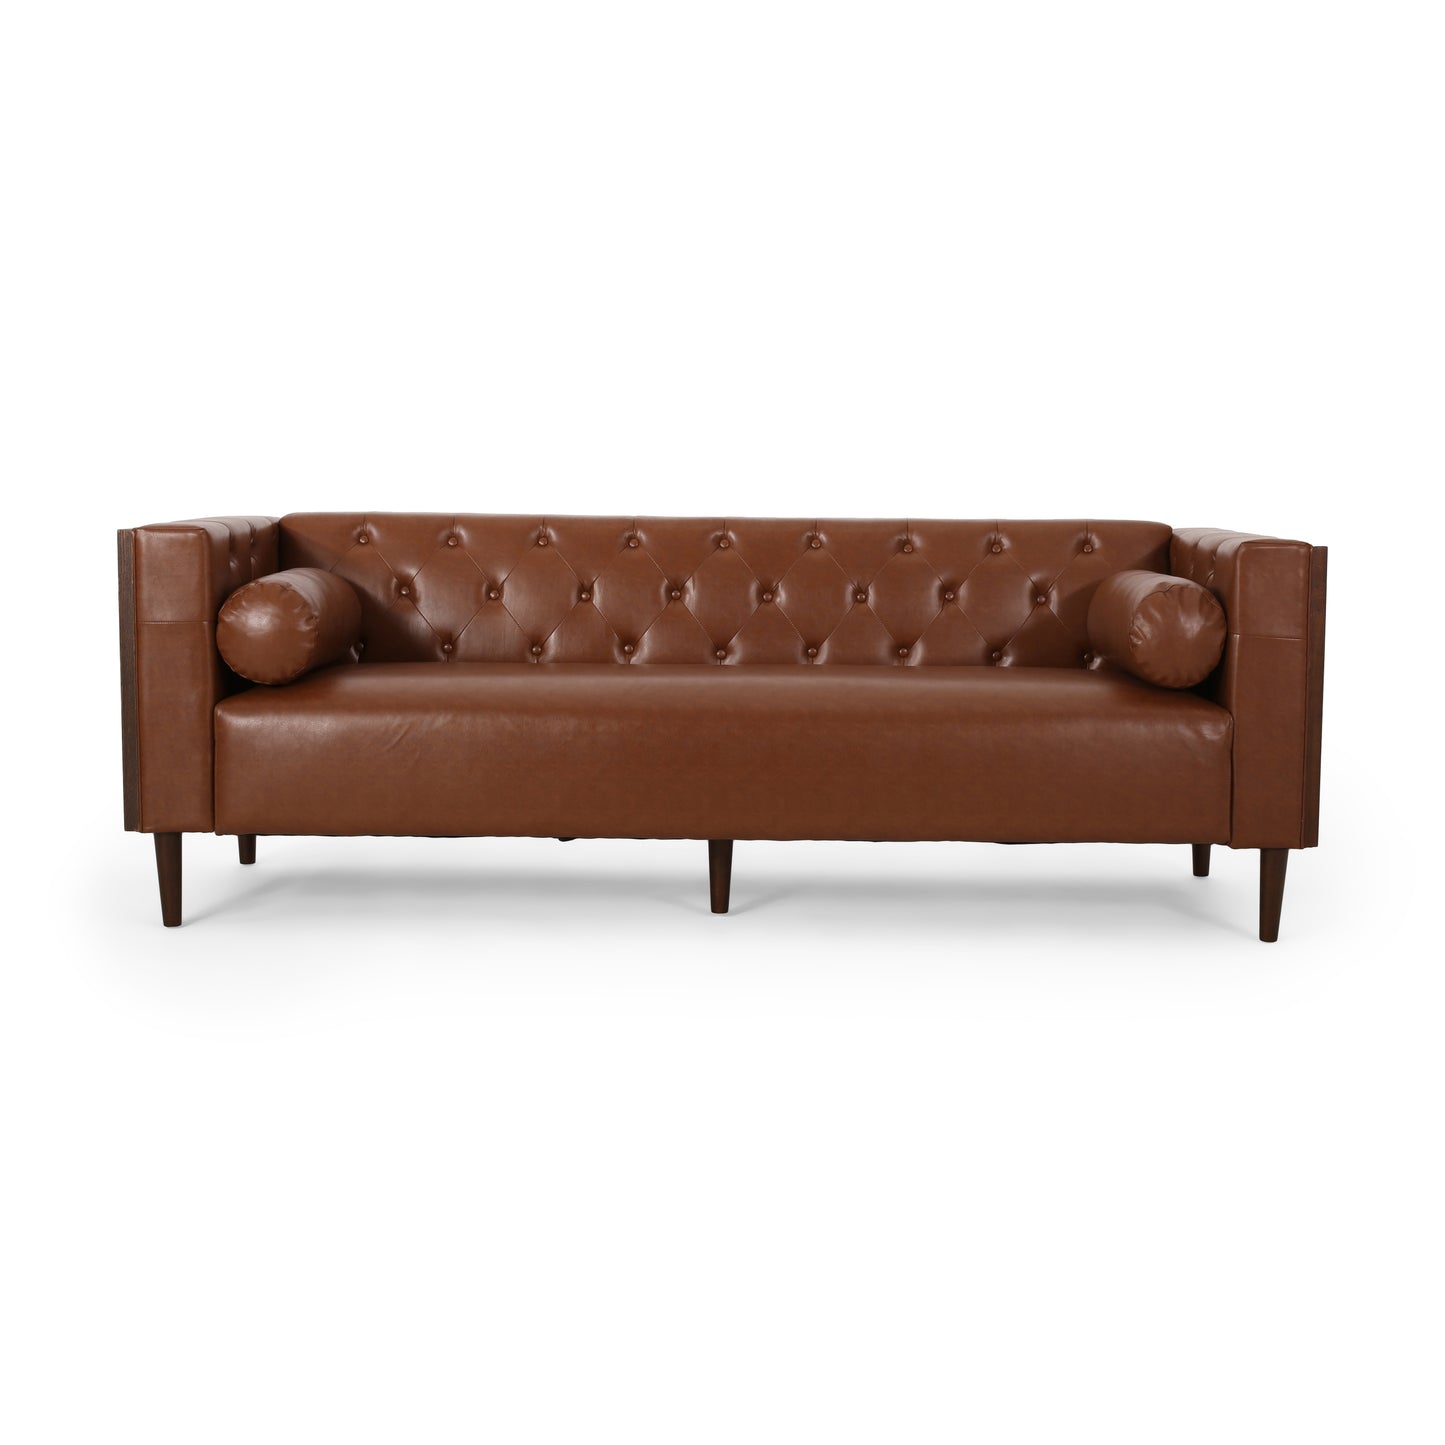 Neilan Contemporary Tufted Deep Seated Sofa with Accent Pillows